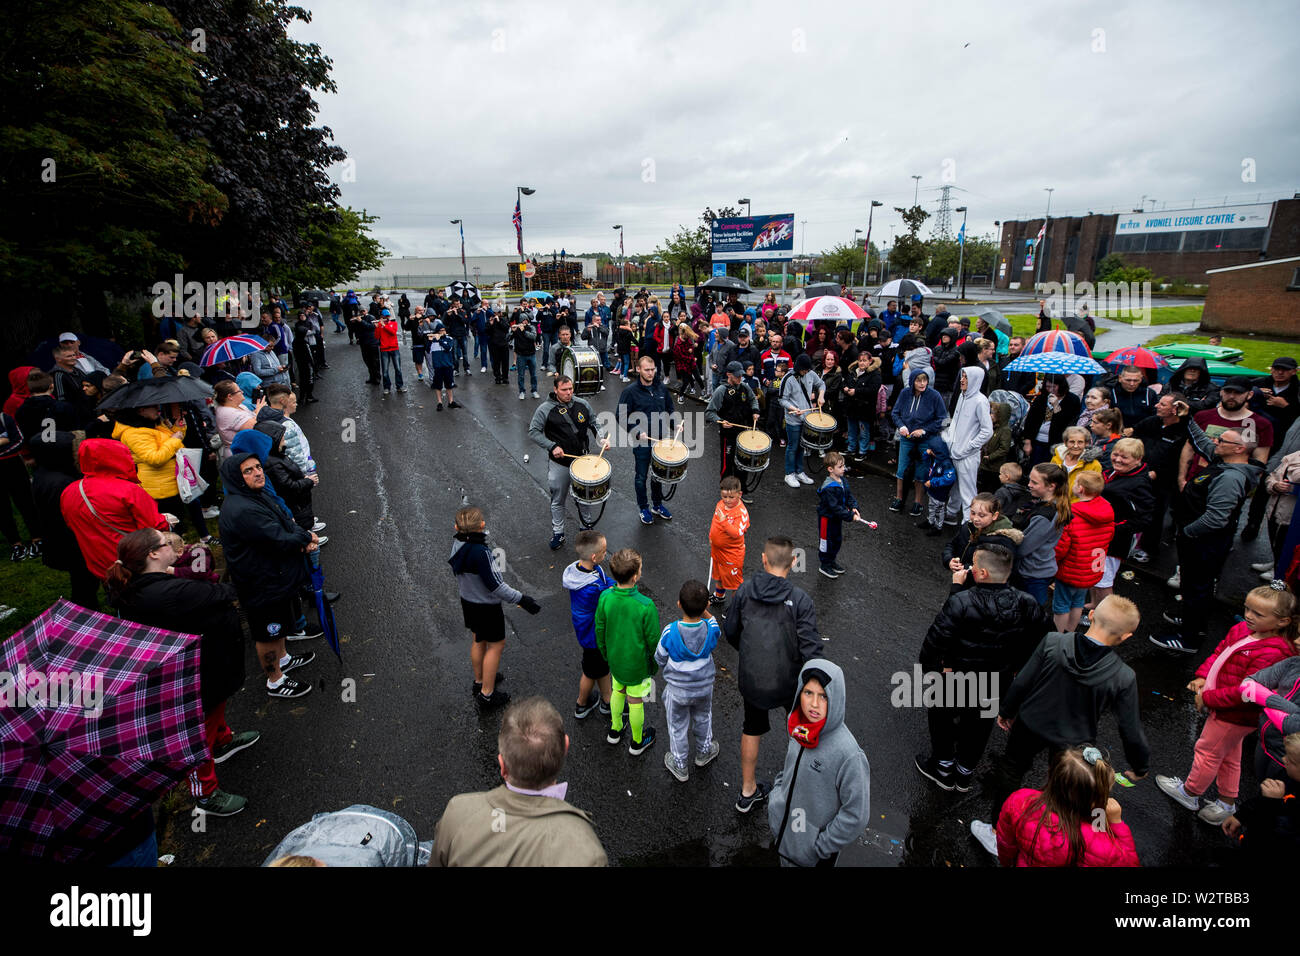 A gathered crowd listen to bandsmen from the Rising Sons Flute Band play tunes at the site of the 11th night bonfire at Avoniel Leisure Centre in Dublin, Northern Ireland, as organisers host a “family fun day” after Belfast City Council reaffirmed its decision to remove materials from a bonfire site beside the centre. Stock Photo